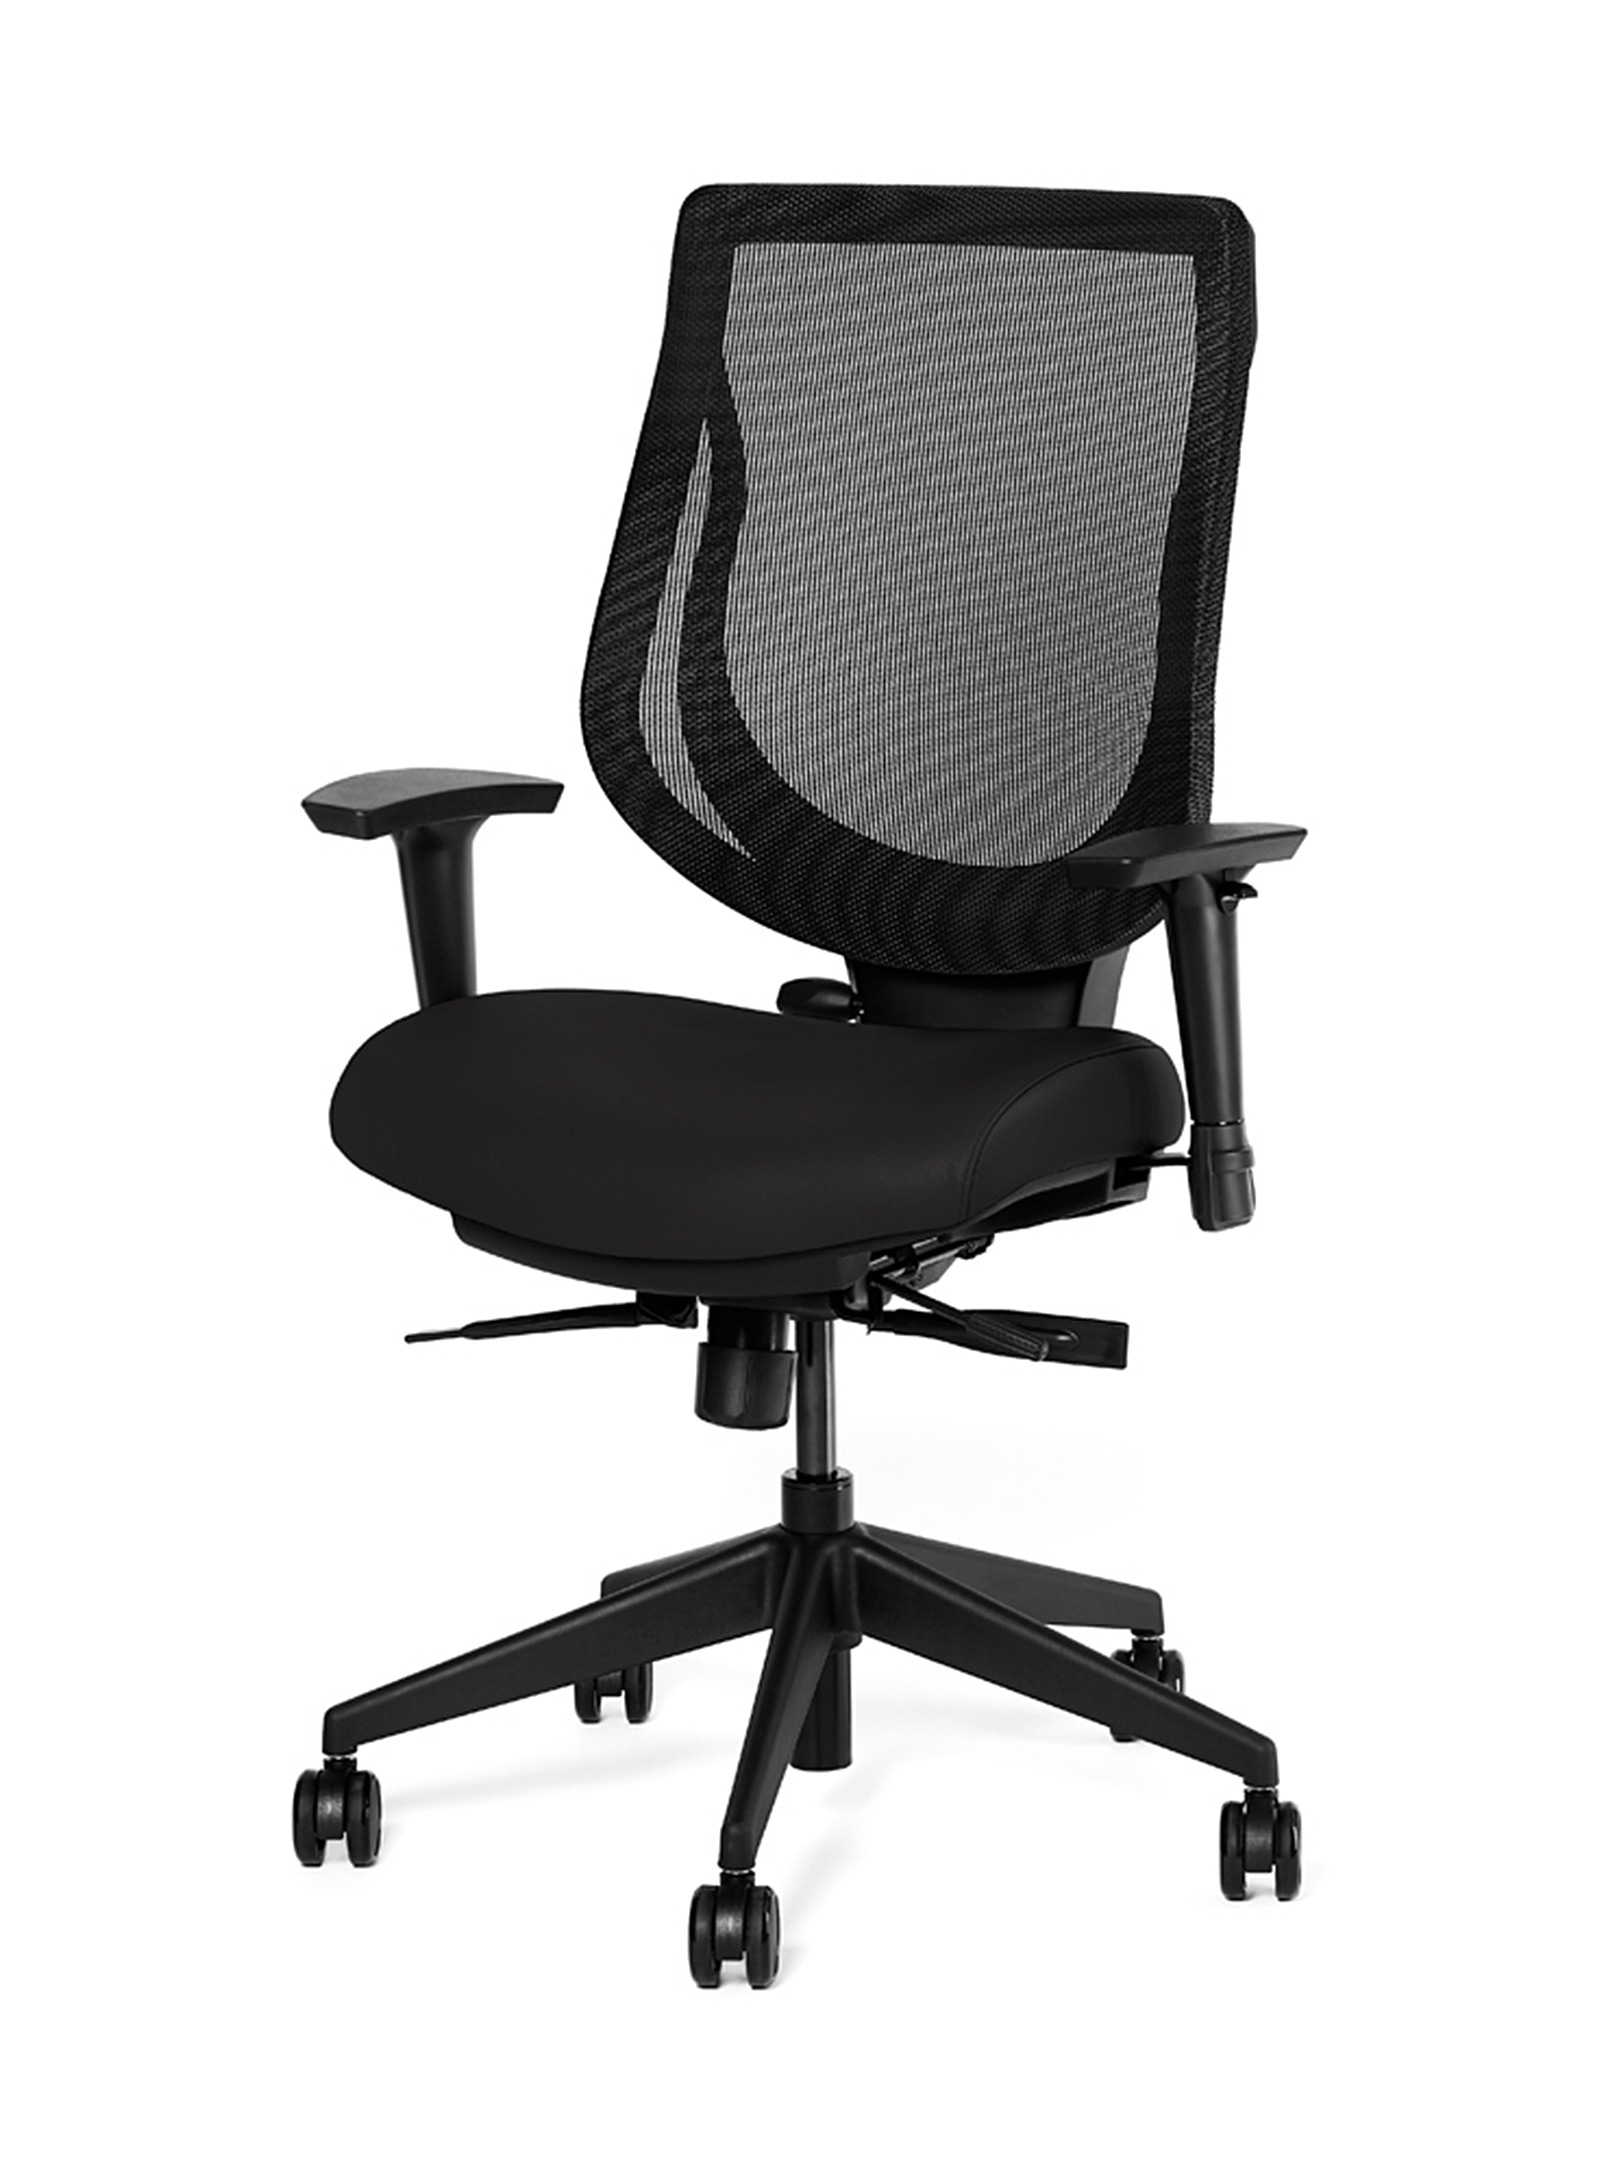 Ergonofis Youtoo Ergonomic Chair With Leather Seat Black Base